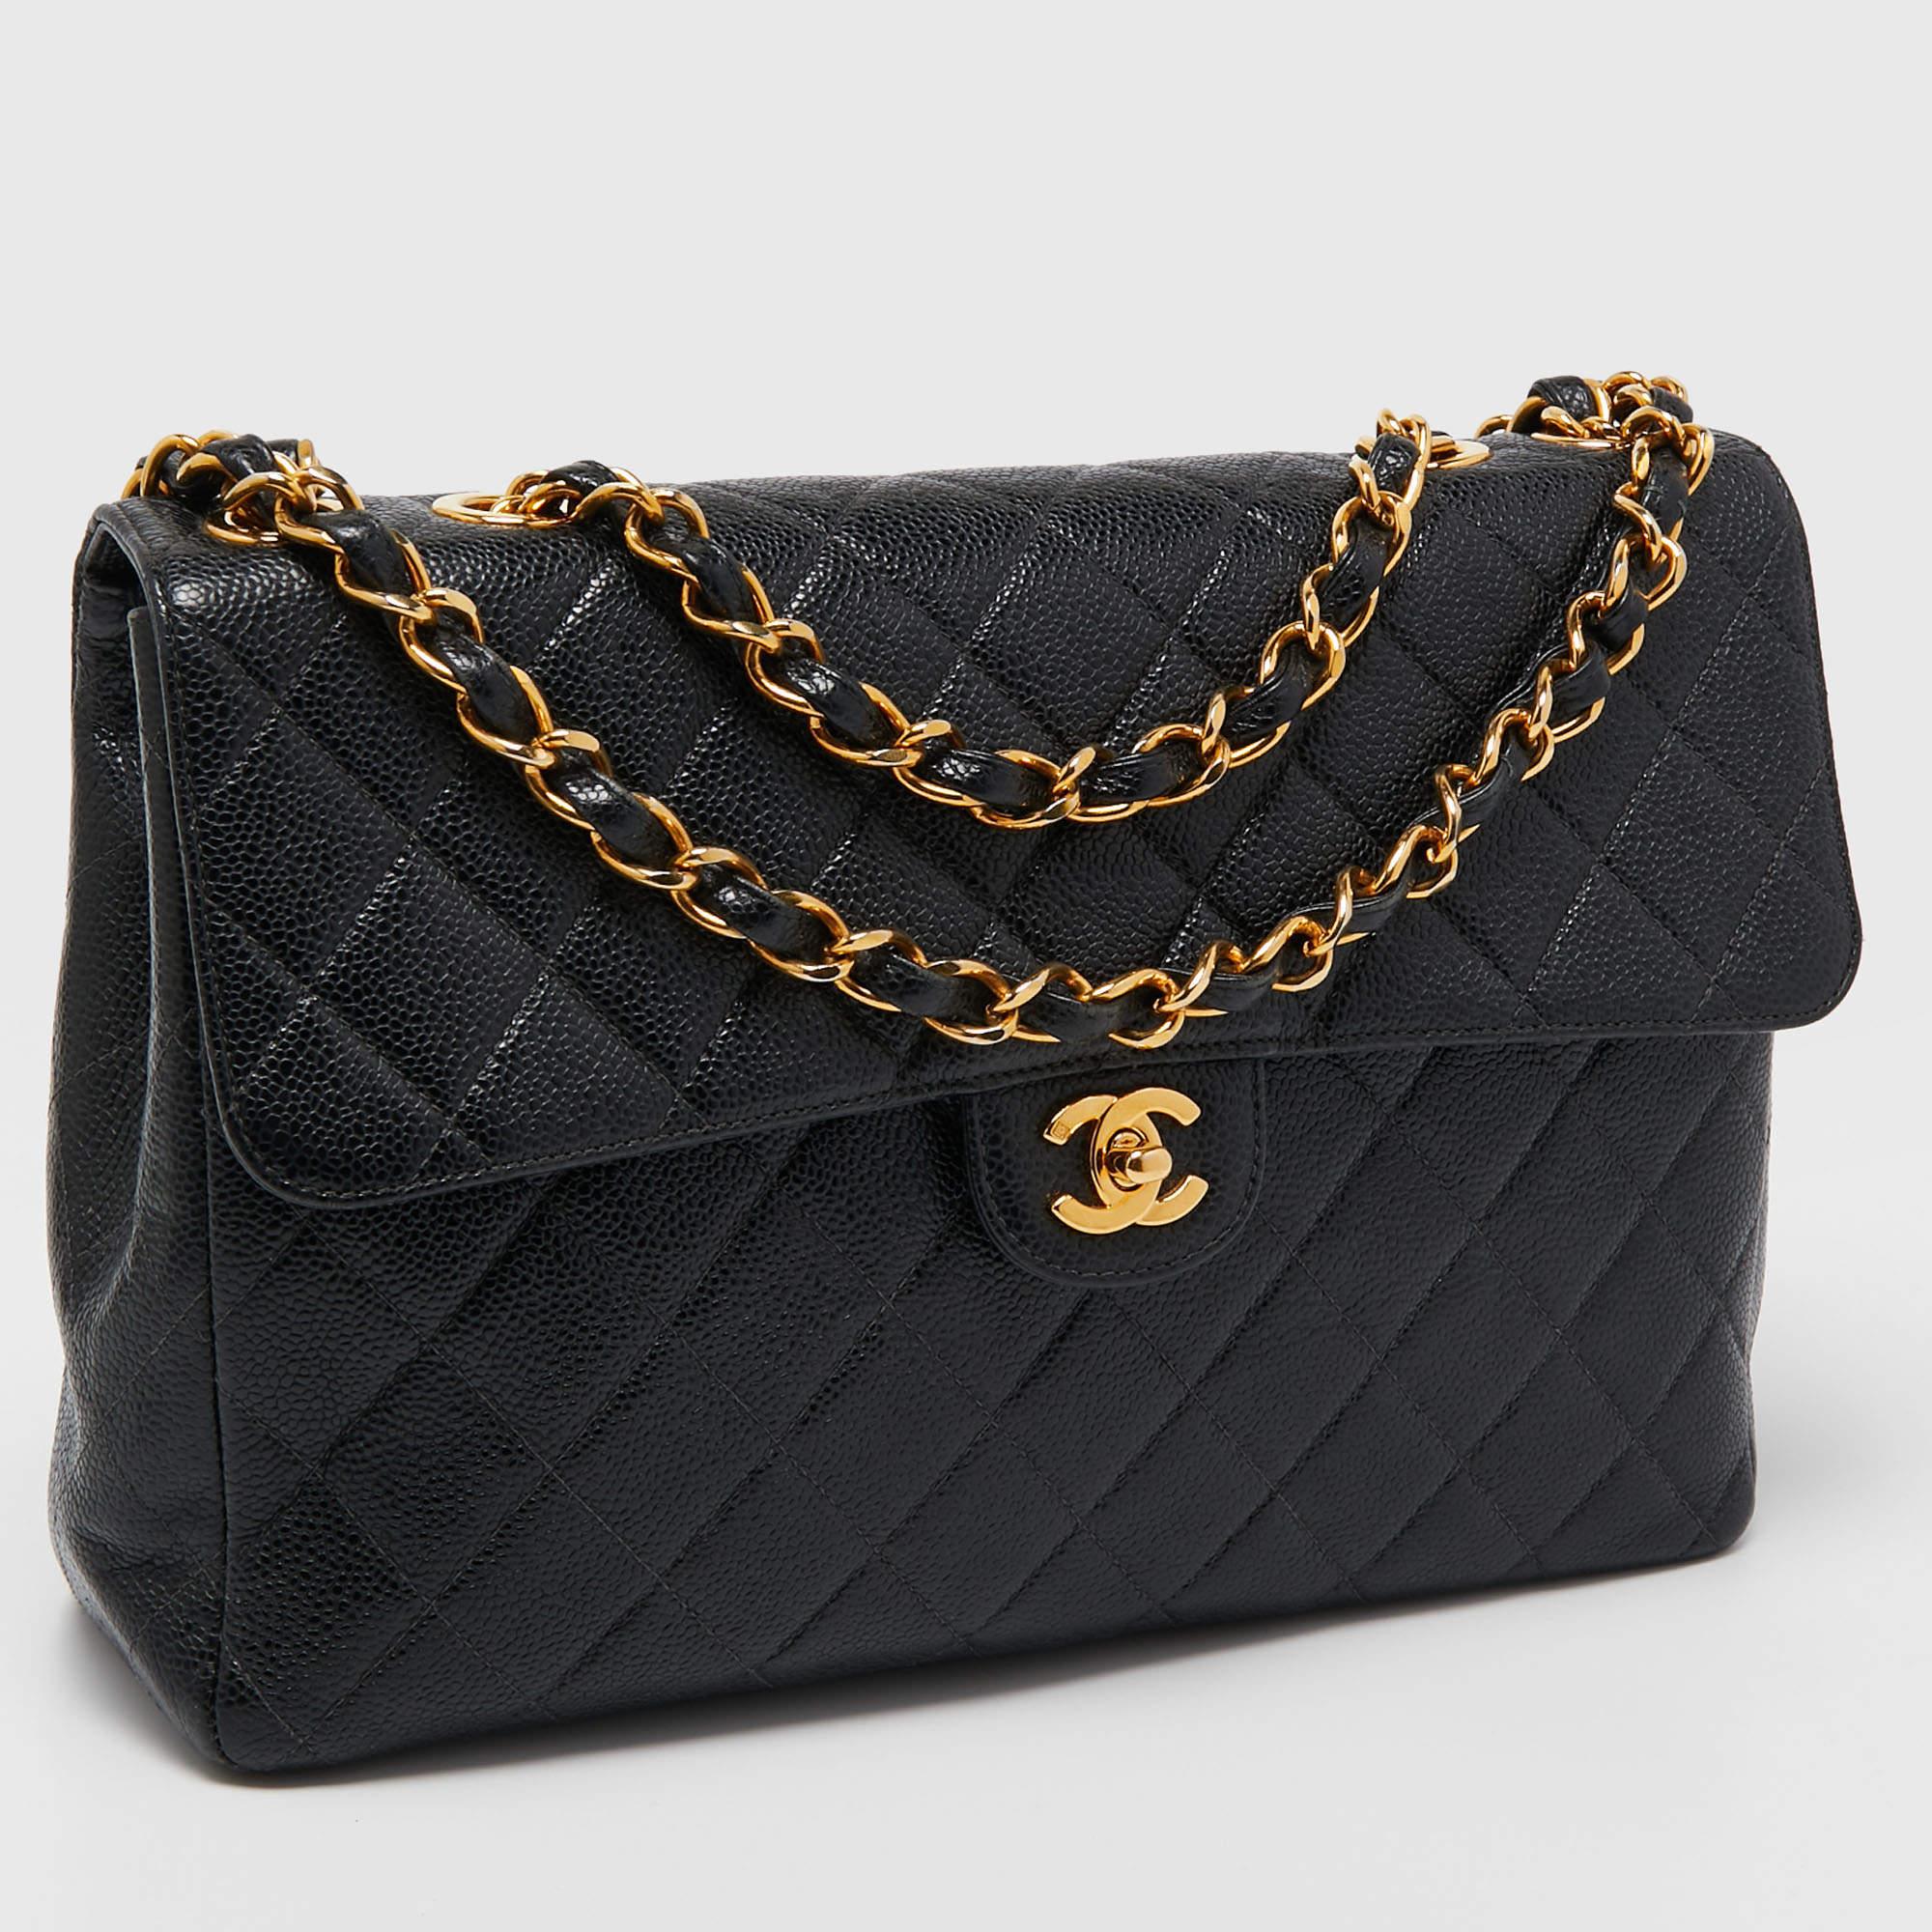 Chanel Black Quilted Caviar Leather Maxi Single Flap Bag 11